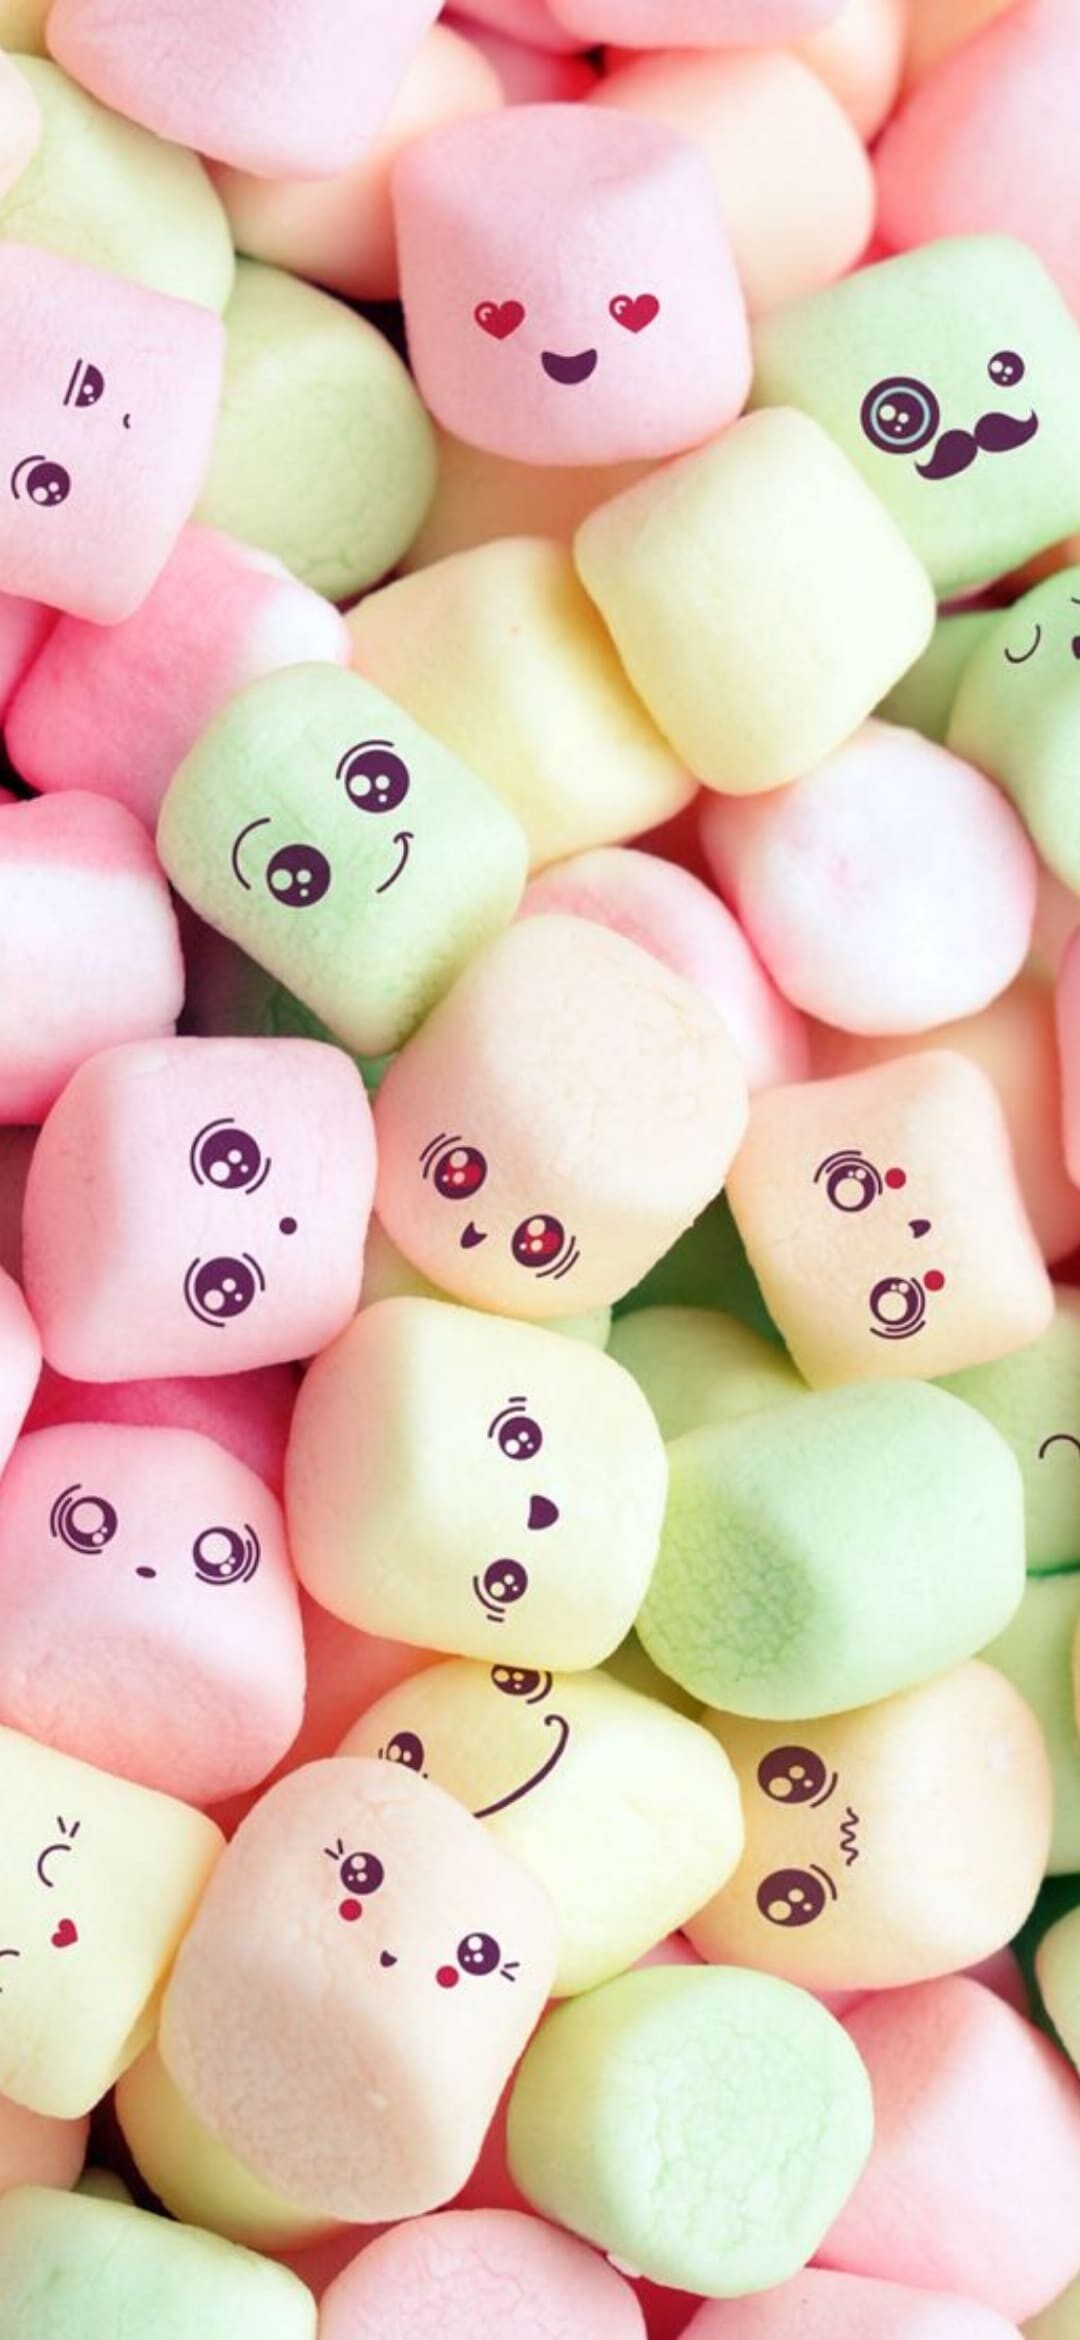 Sweets: Marshmallows, Made of sugar, corn syrup, water and gelatin. 1080x2340 HD Wallpaper.